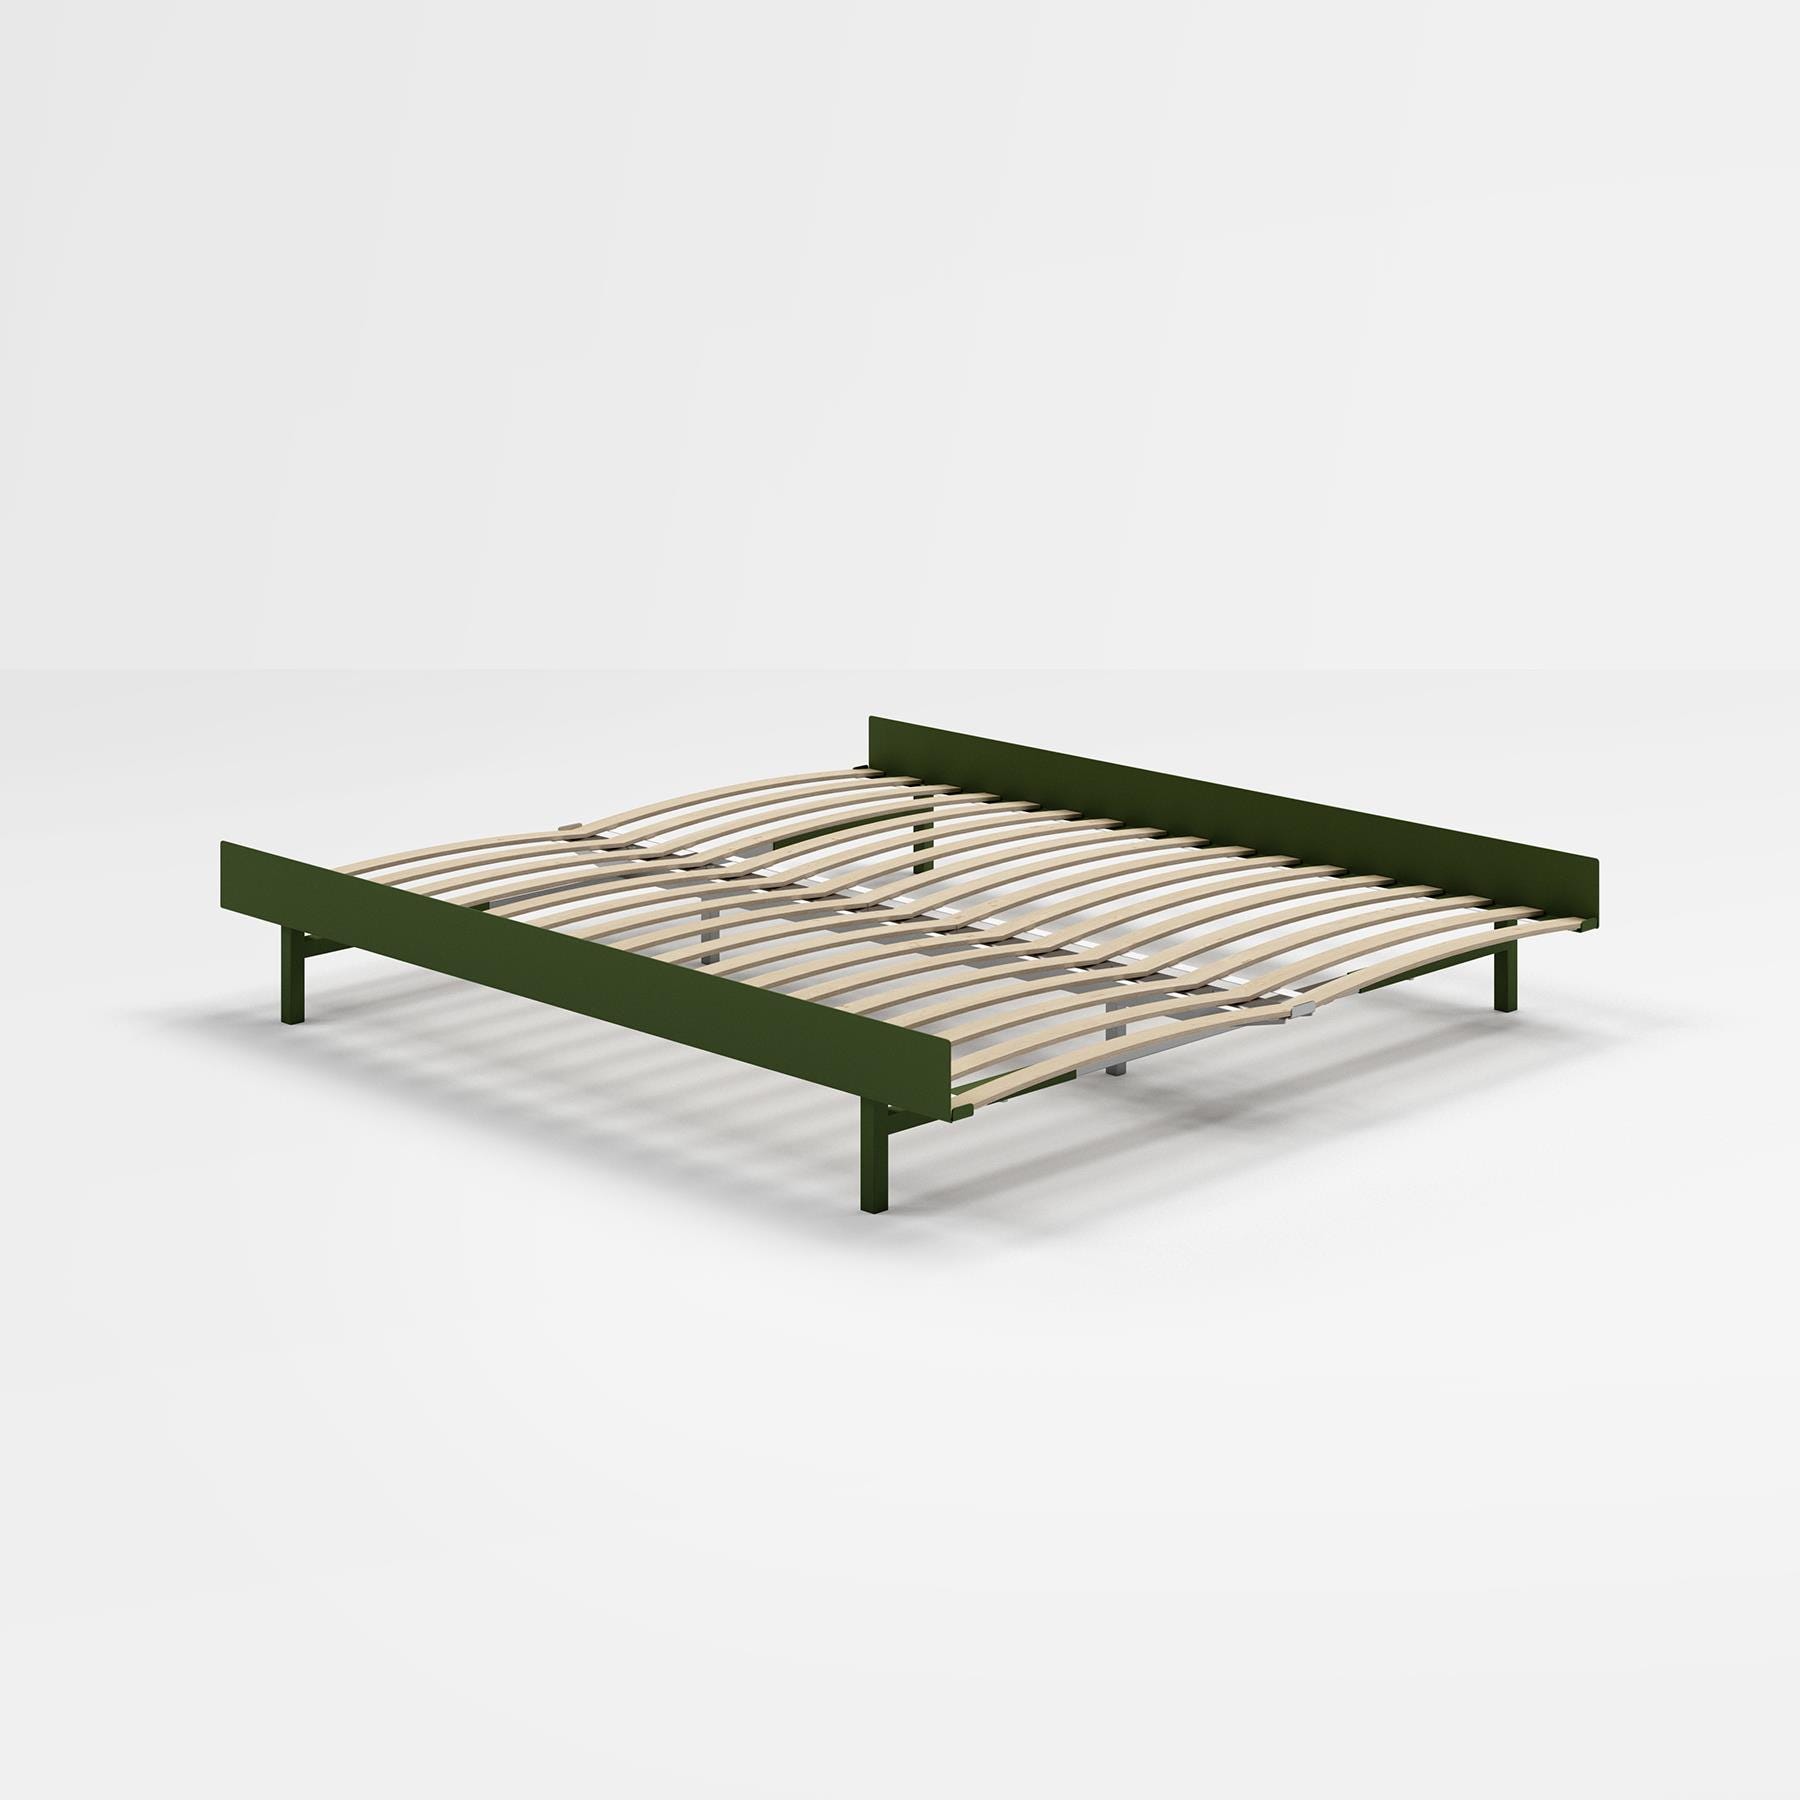 Moebe Bed King Pine Green No Side Table Green Designer Furniture From Holloways Of Ludlow